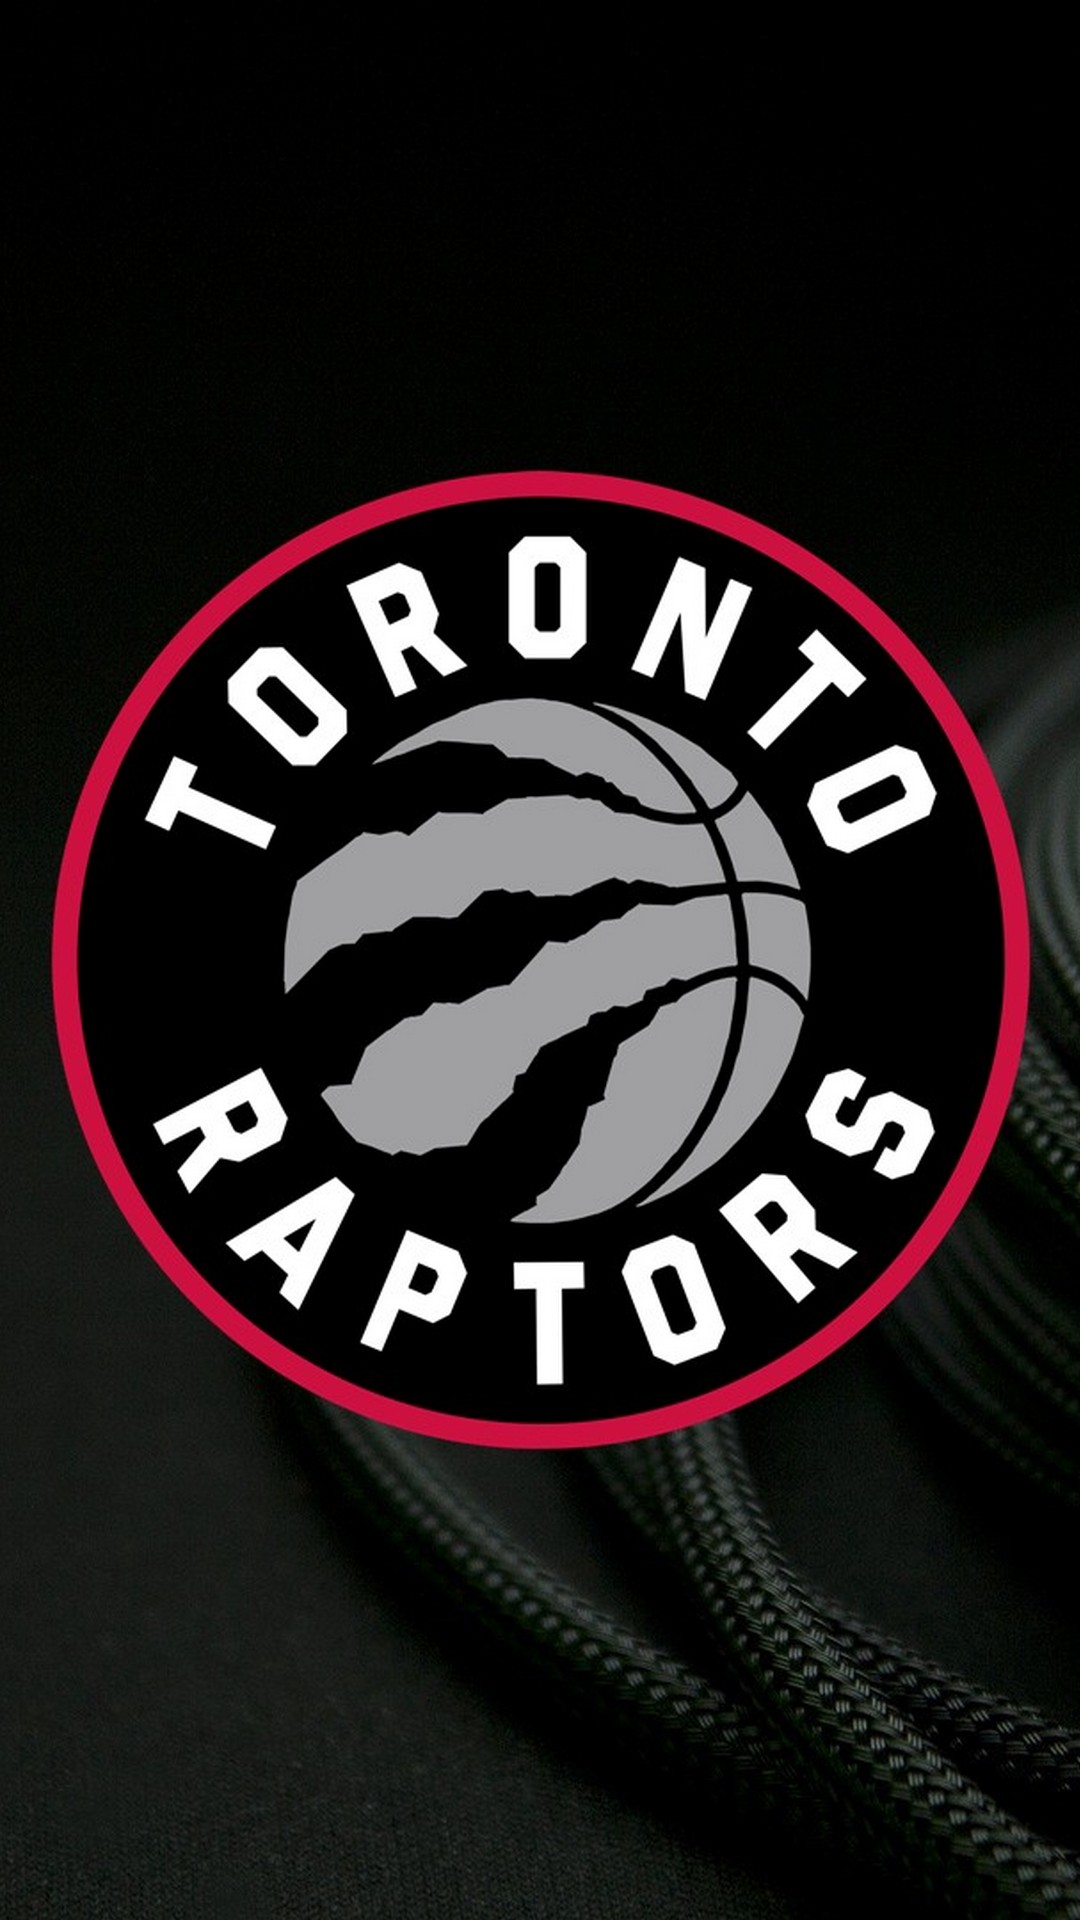 iPhone 8 Wallpaper Toronto Raptors with resolution 1080X1920 pixel. You can make this wallpaper for your iPhone 5, 6, 7, 8, X backgrounds, Mobile Screensaver, or iPad Lock Screen